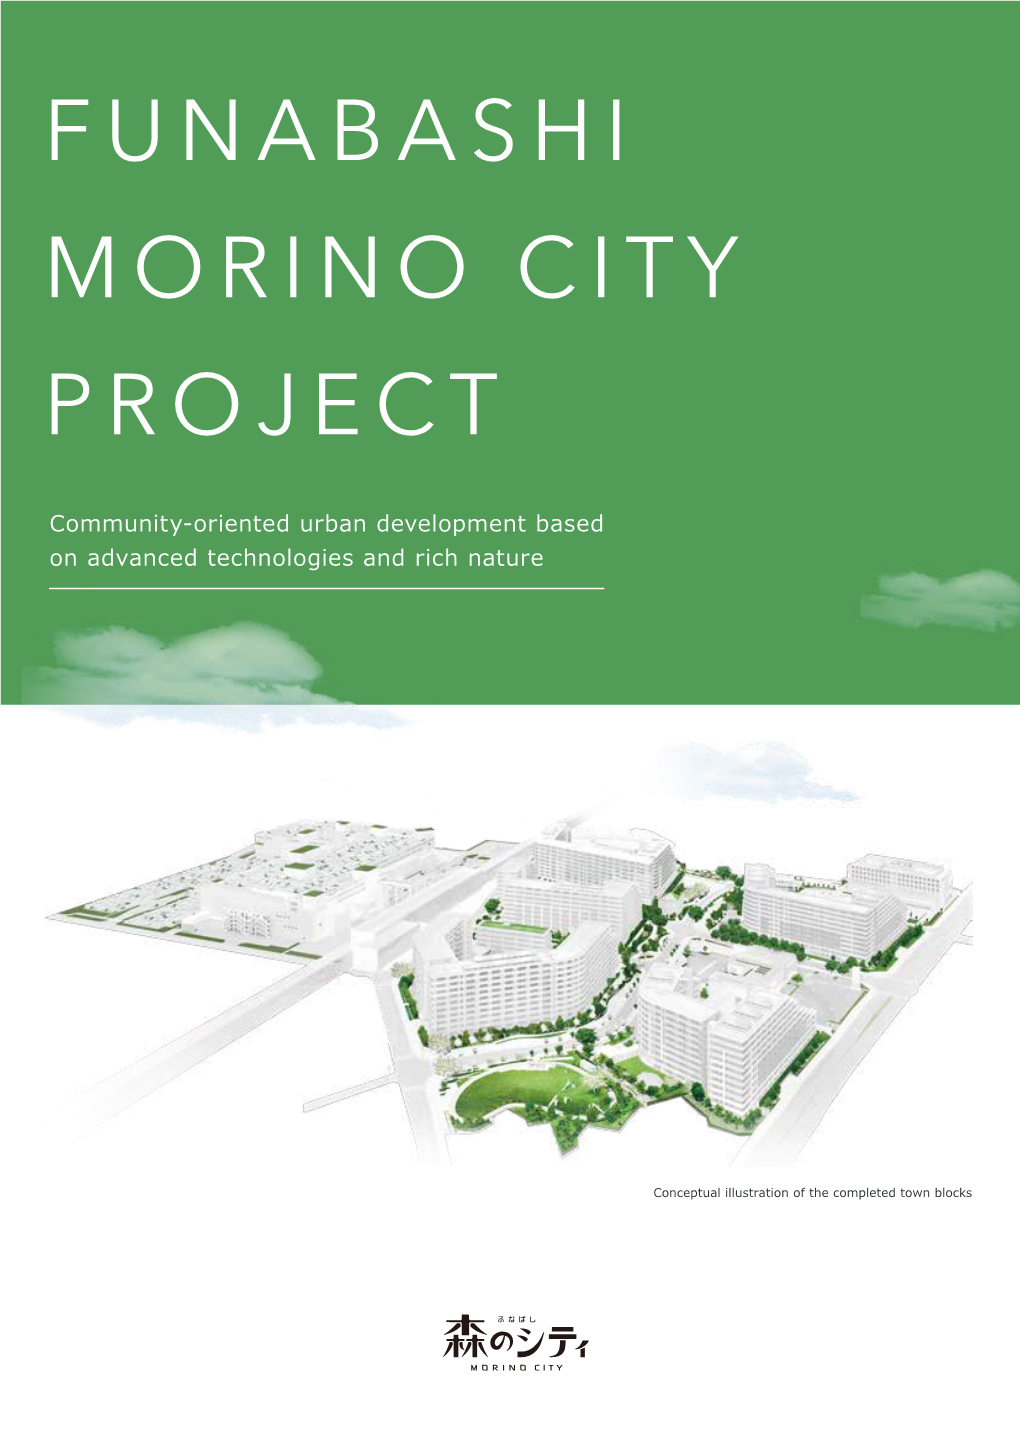 Funabashi Morino City Project Brings Enhanced Commercial, Healthcare, and Childcare Facilities